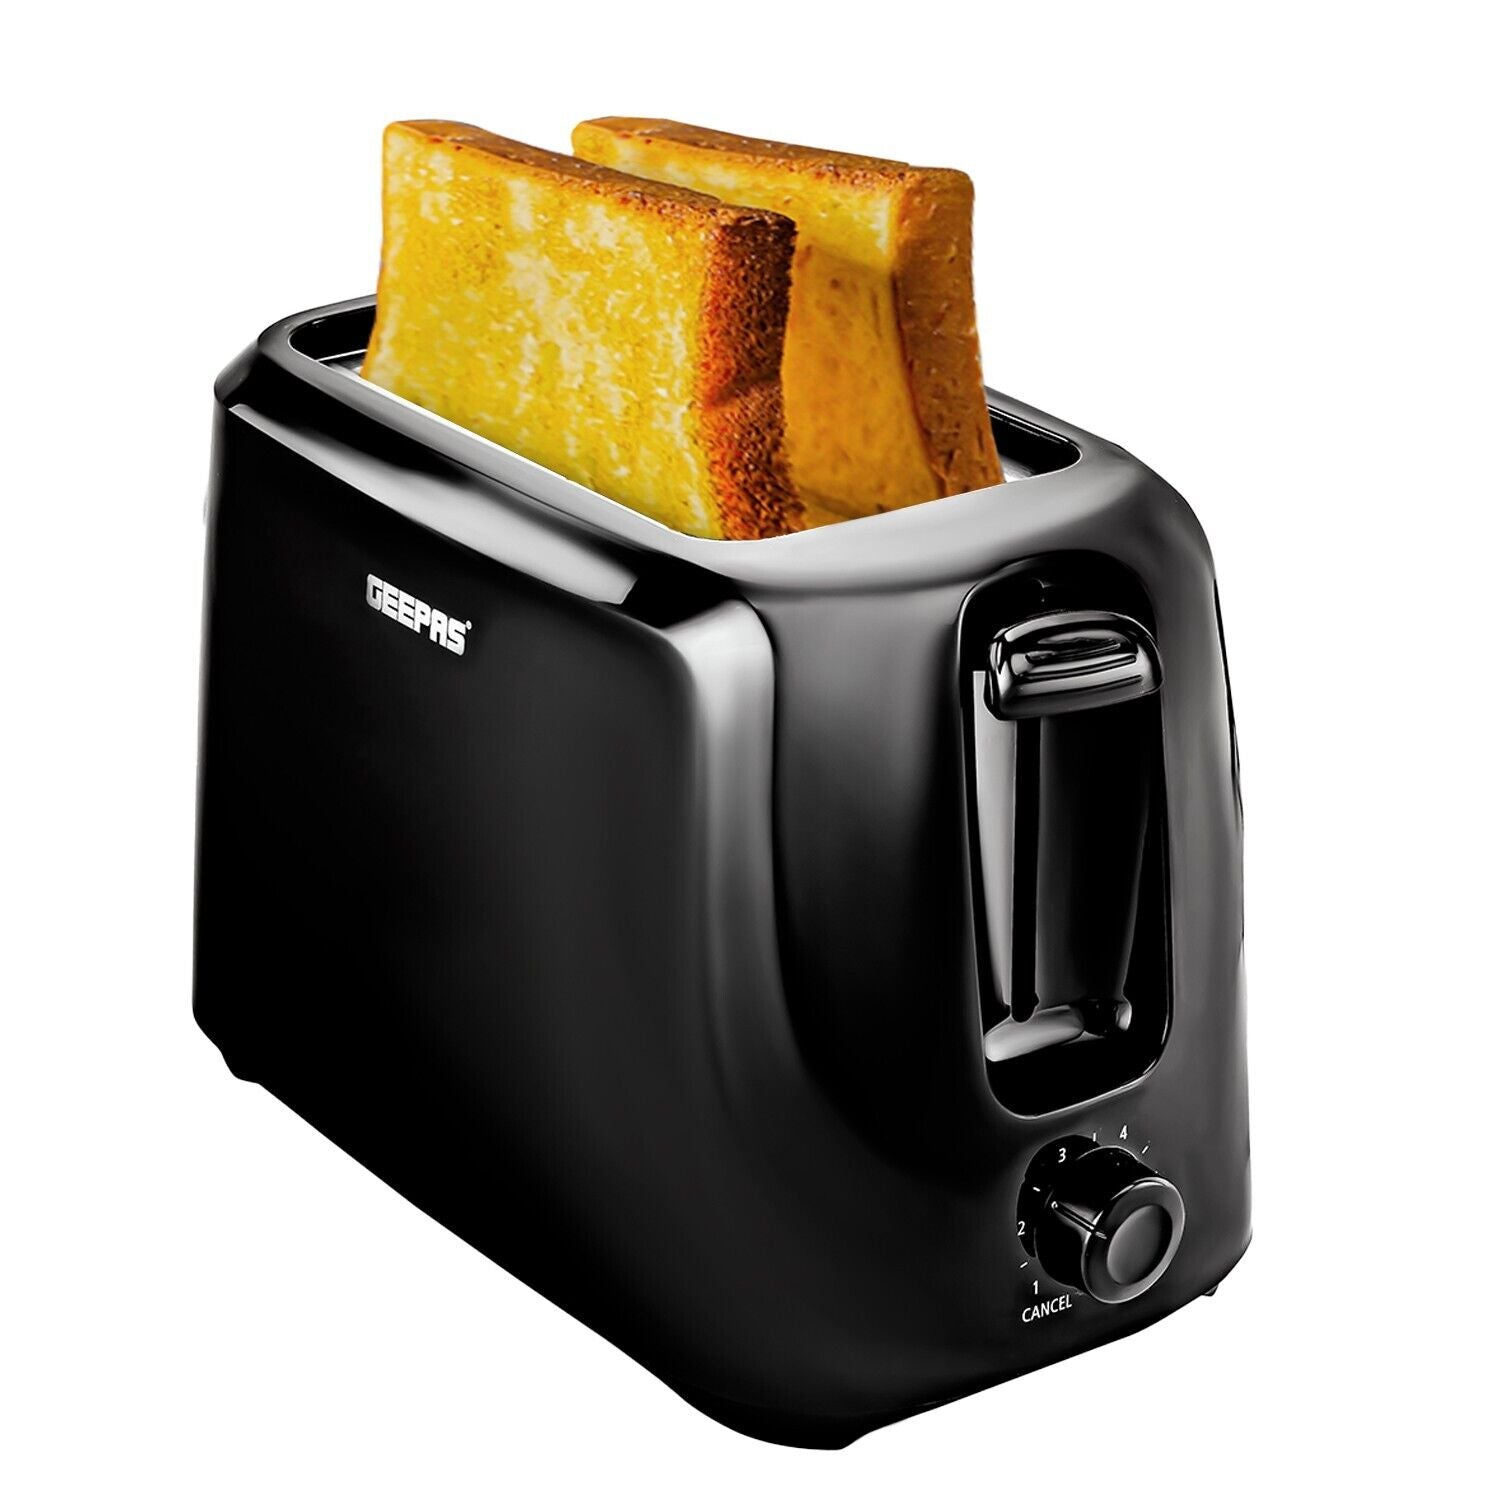 Black 2-Slice Toaster With Adjustable Browning Control